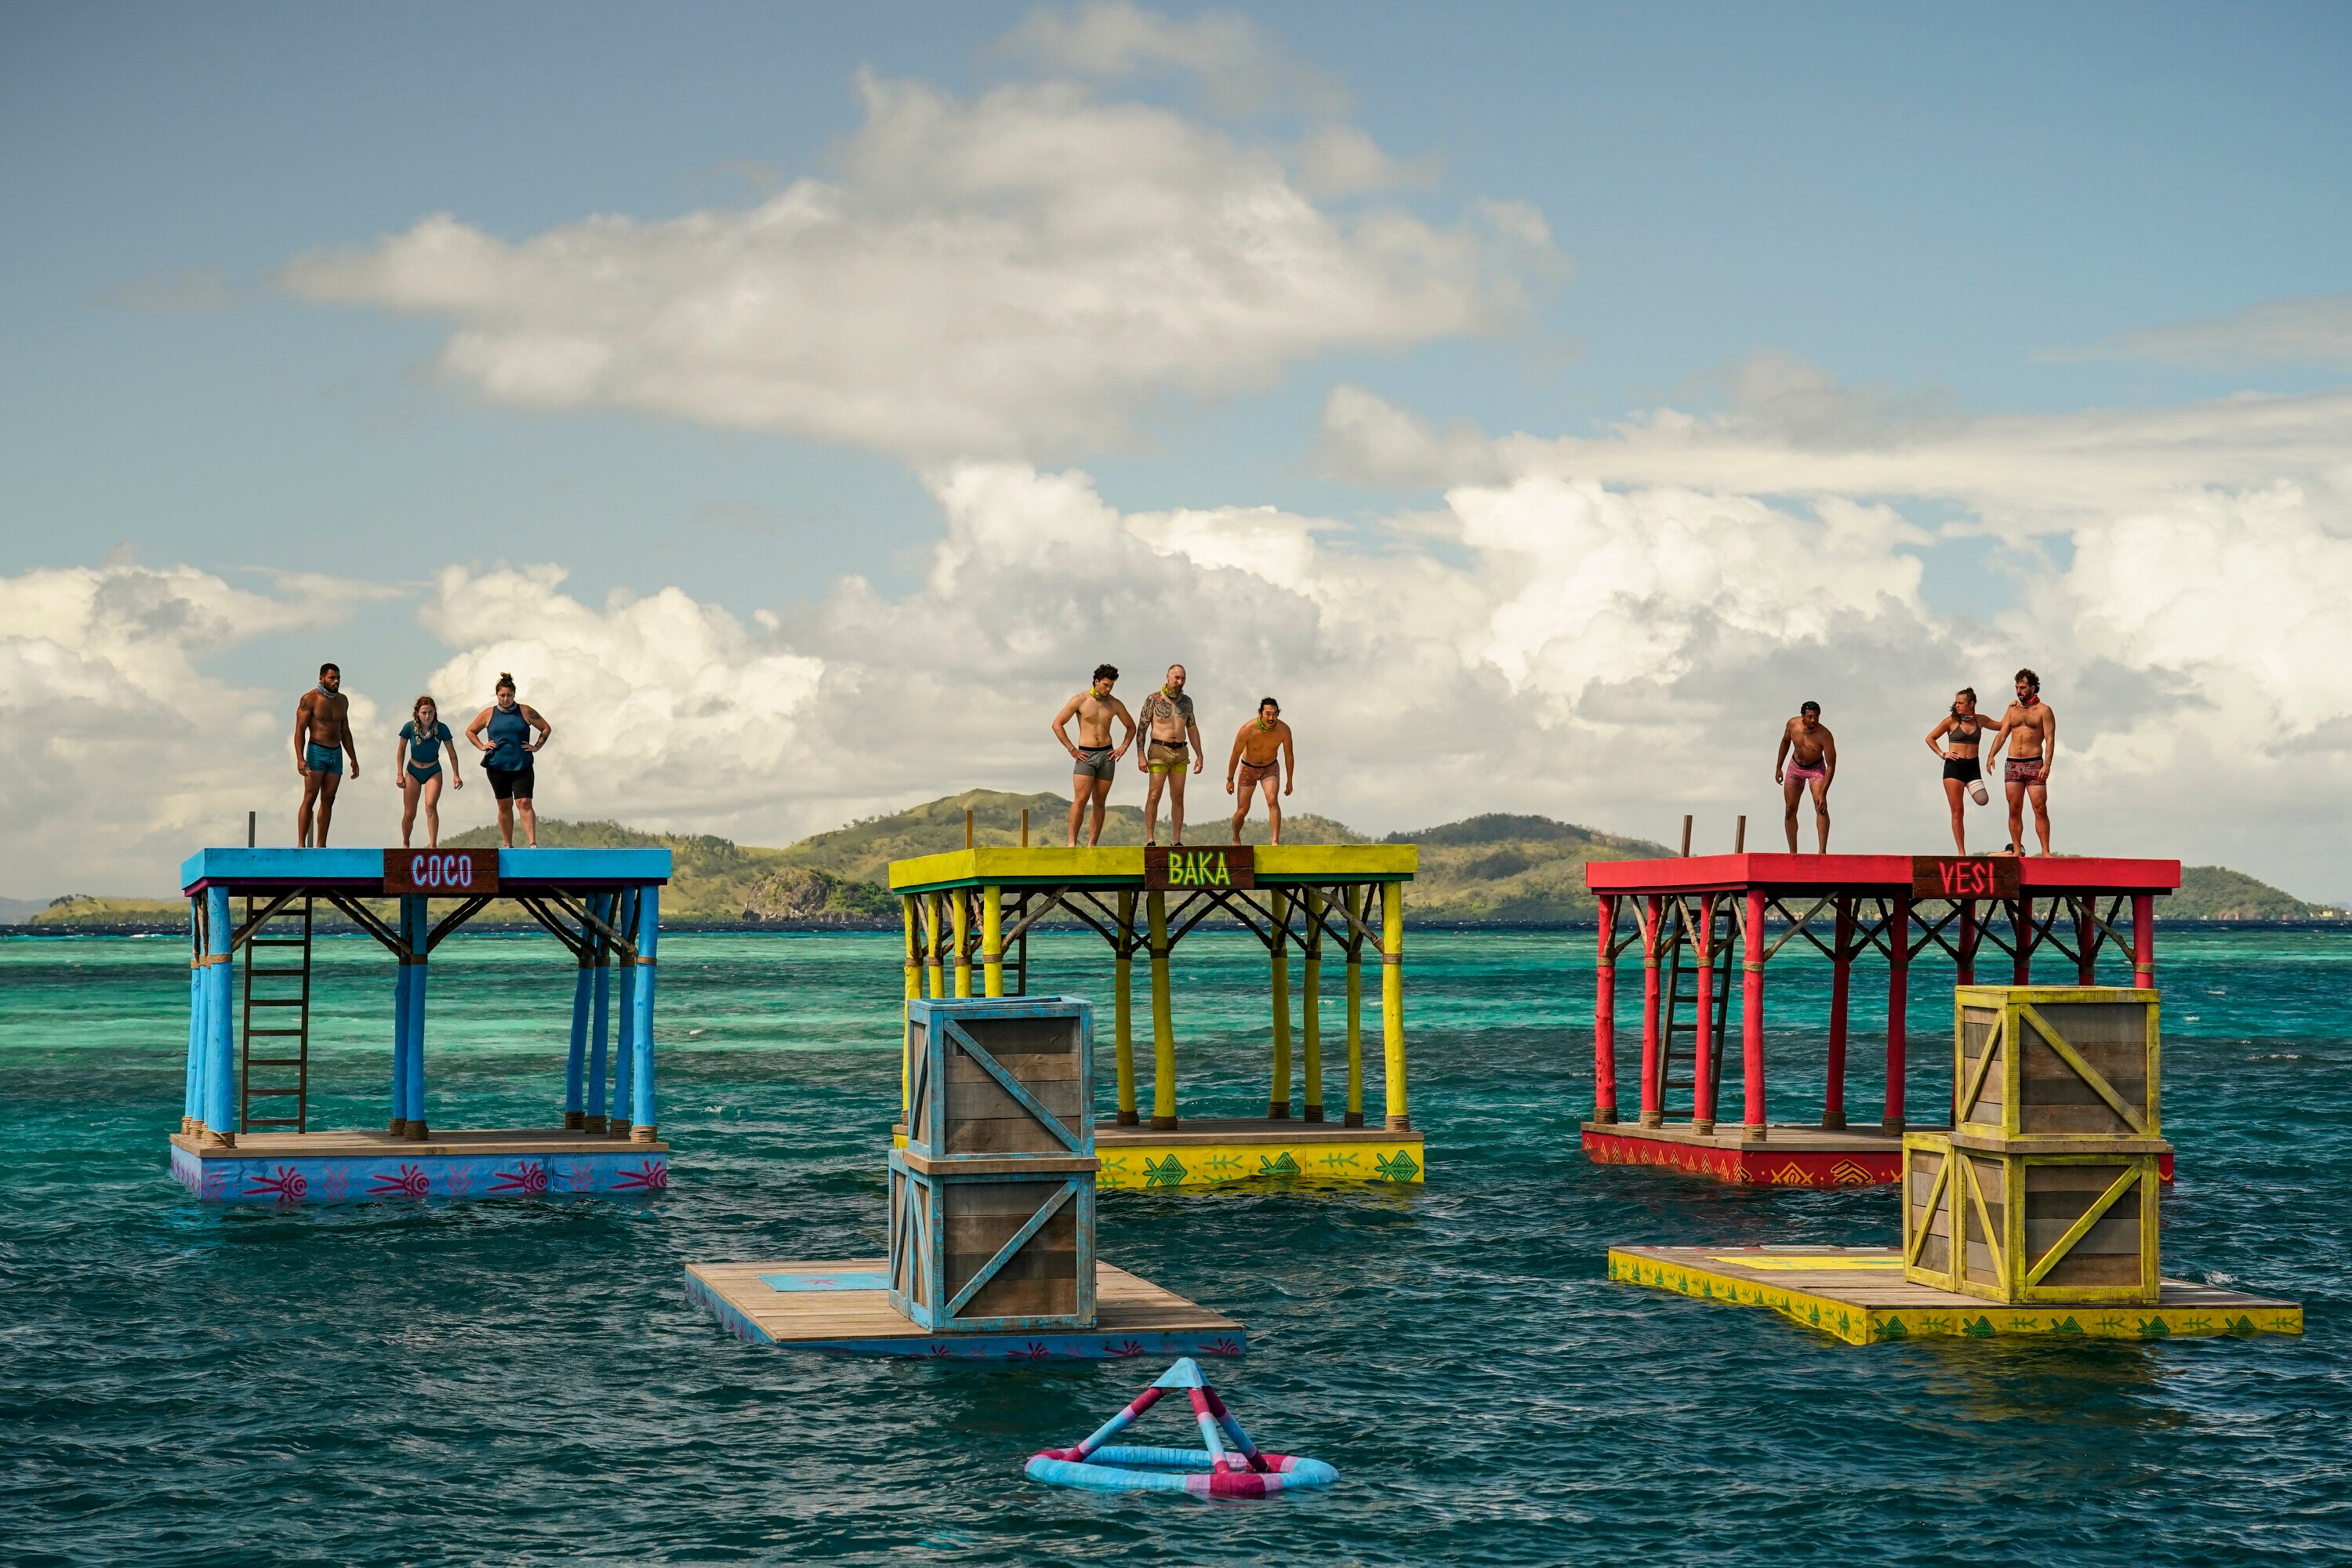 The Coco, Baka, and Vesi tribes compete in the Immunity Challenge in 'Survivor' Season 43 Episode 3 tonight, Oct. 5, on CBS. Three members from each tribe stand on three different platforms in the water.